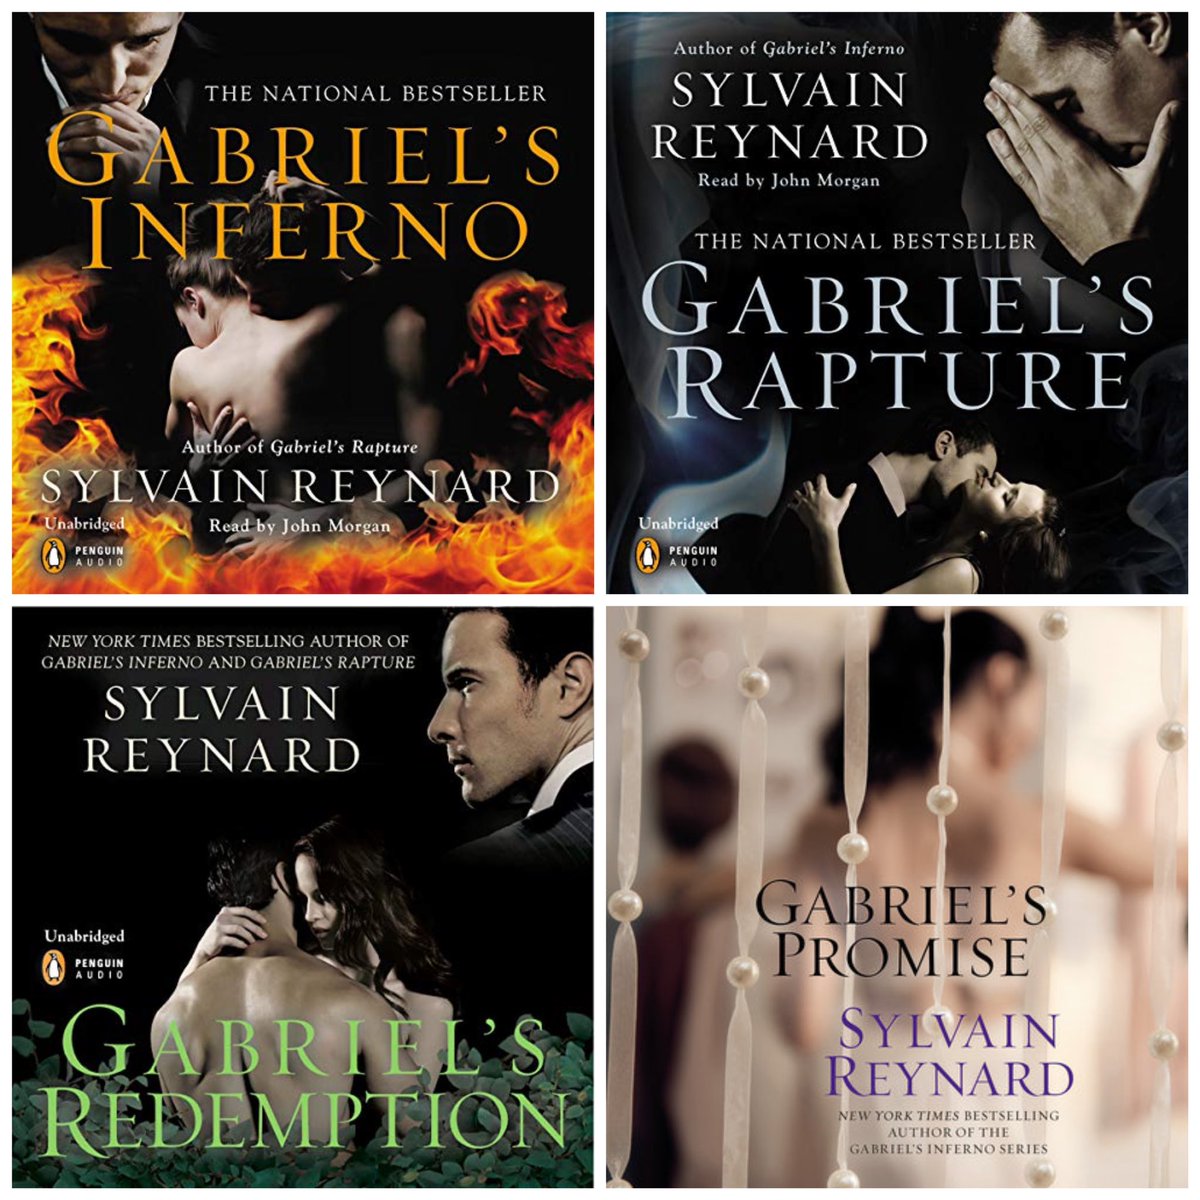 The #GabrielSeries audiobooks by @sylvainreynard are available at the Apple Books store. Get them today. #GabrielsInferno: books.apple.com/us/audiobook/g… #GabrielsRapture: books.apple.com/us/audiobook/g… #GabrielsRedemption: books.apple.com/us/audiobook/g… #GabrielsPromise: books.apple.com/us/audiobook/g…